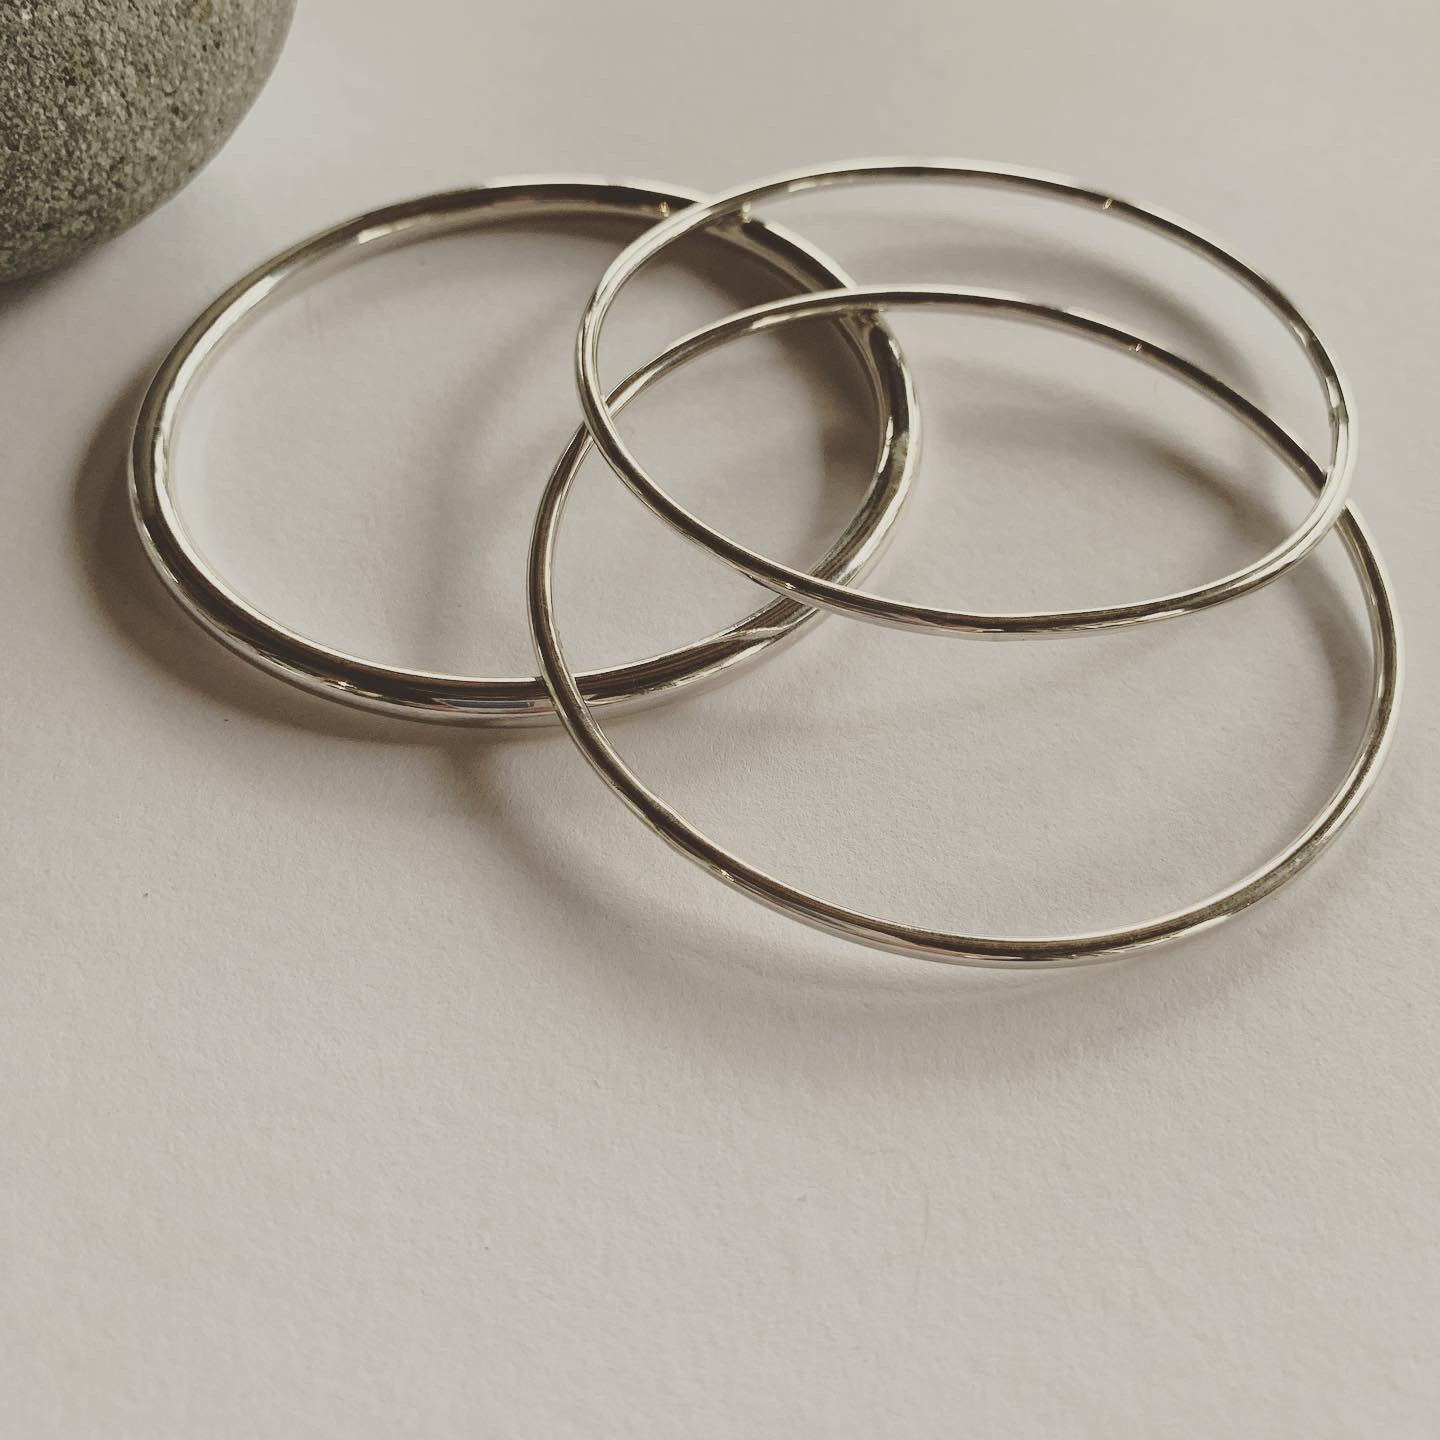 Solid Sterling Silver 4mm Bangle